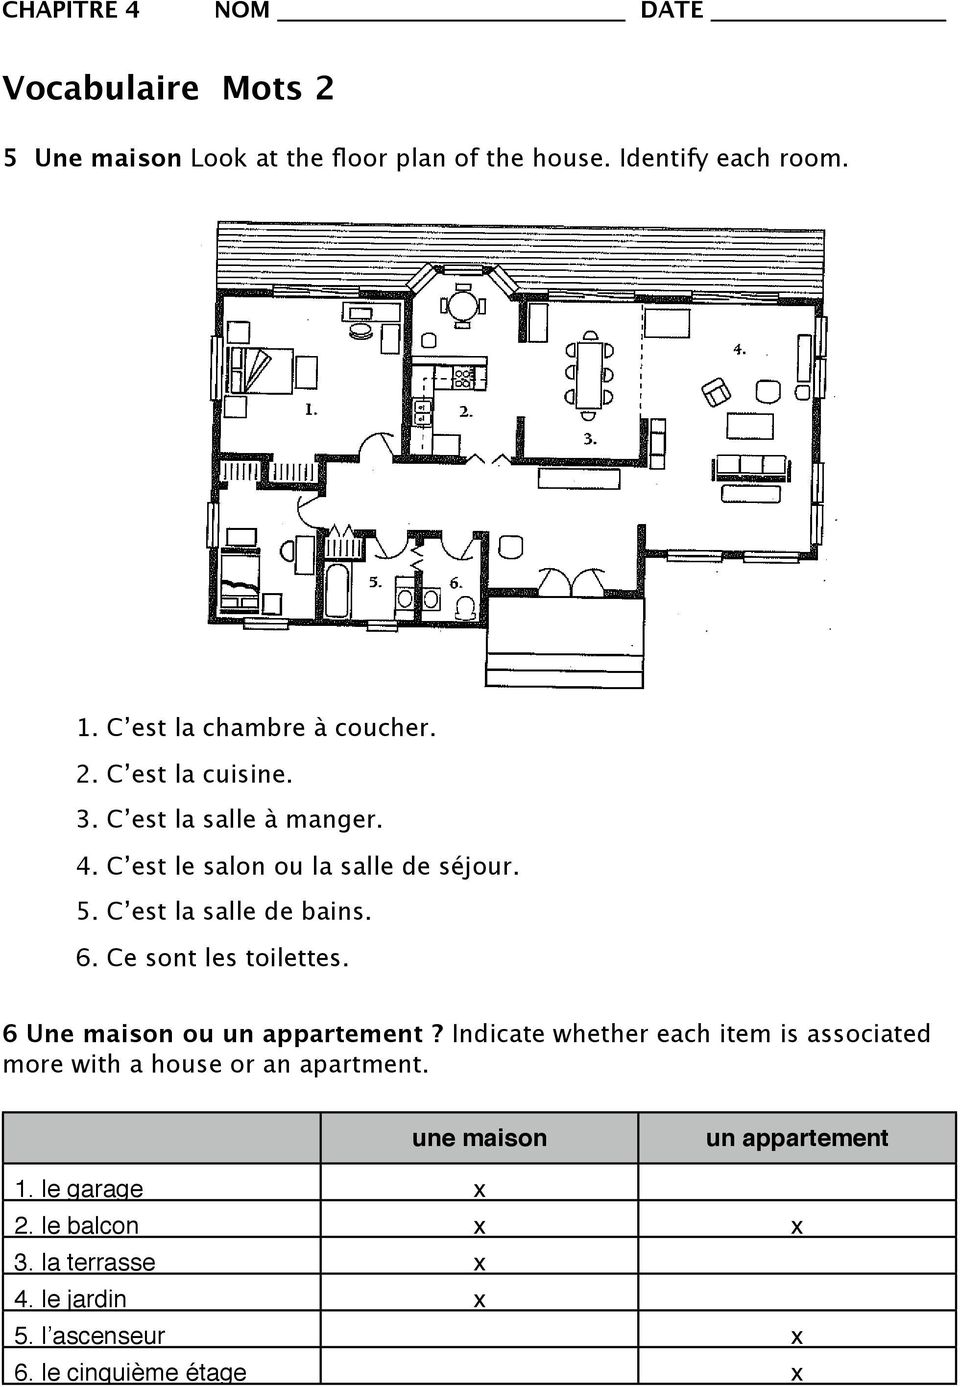 6 Une maison ou un appartement? Indicate whether each item is associated more with a house or an apartment.